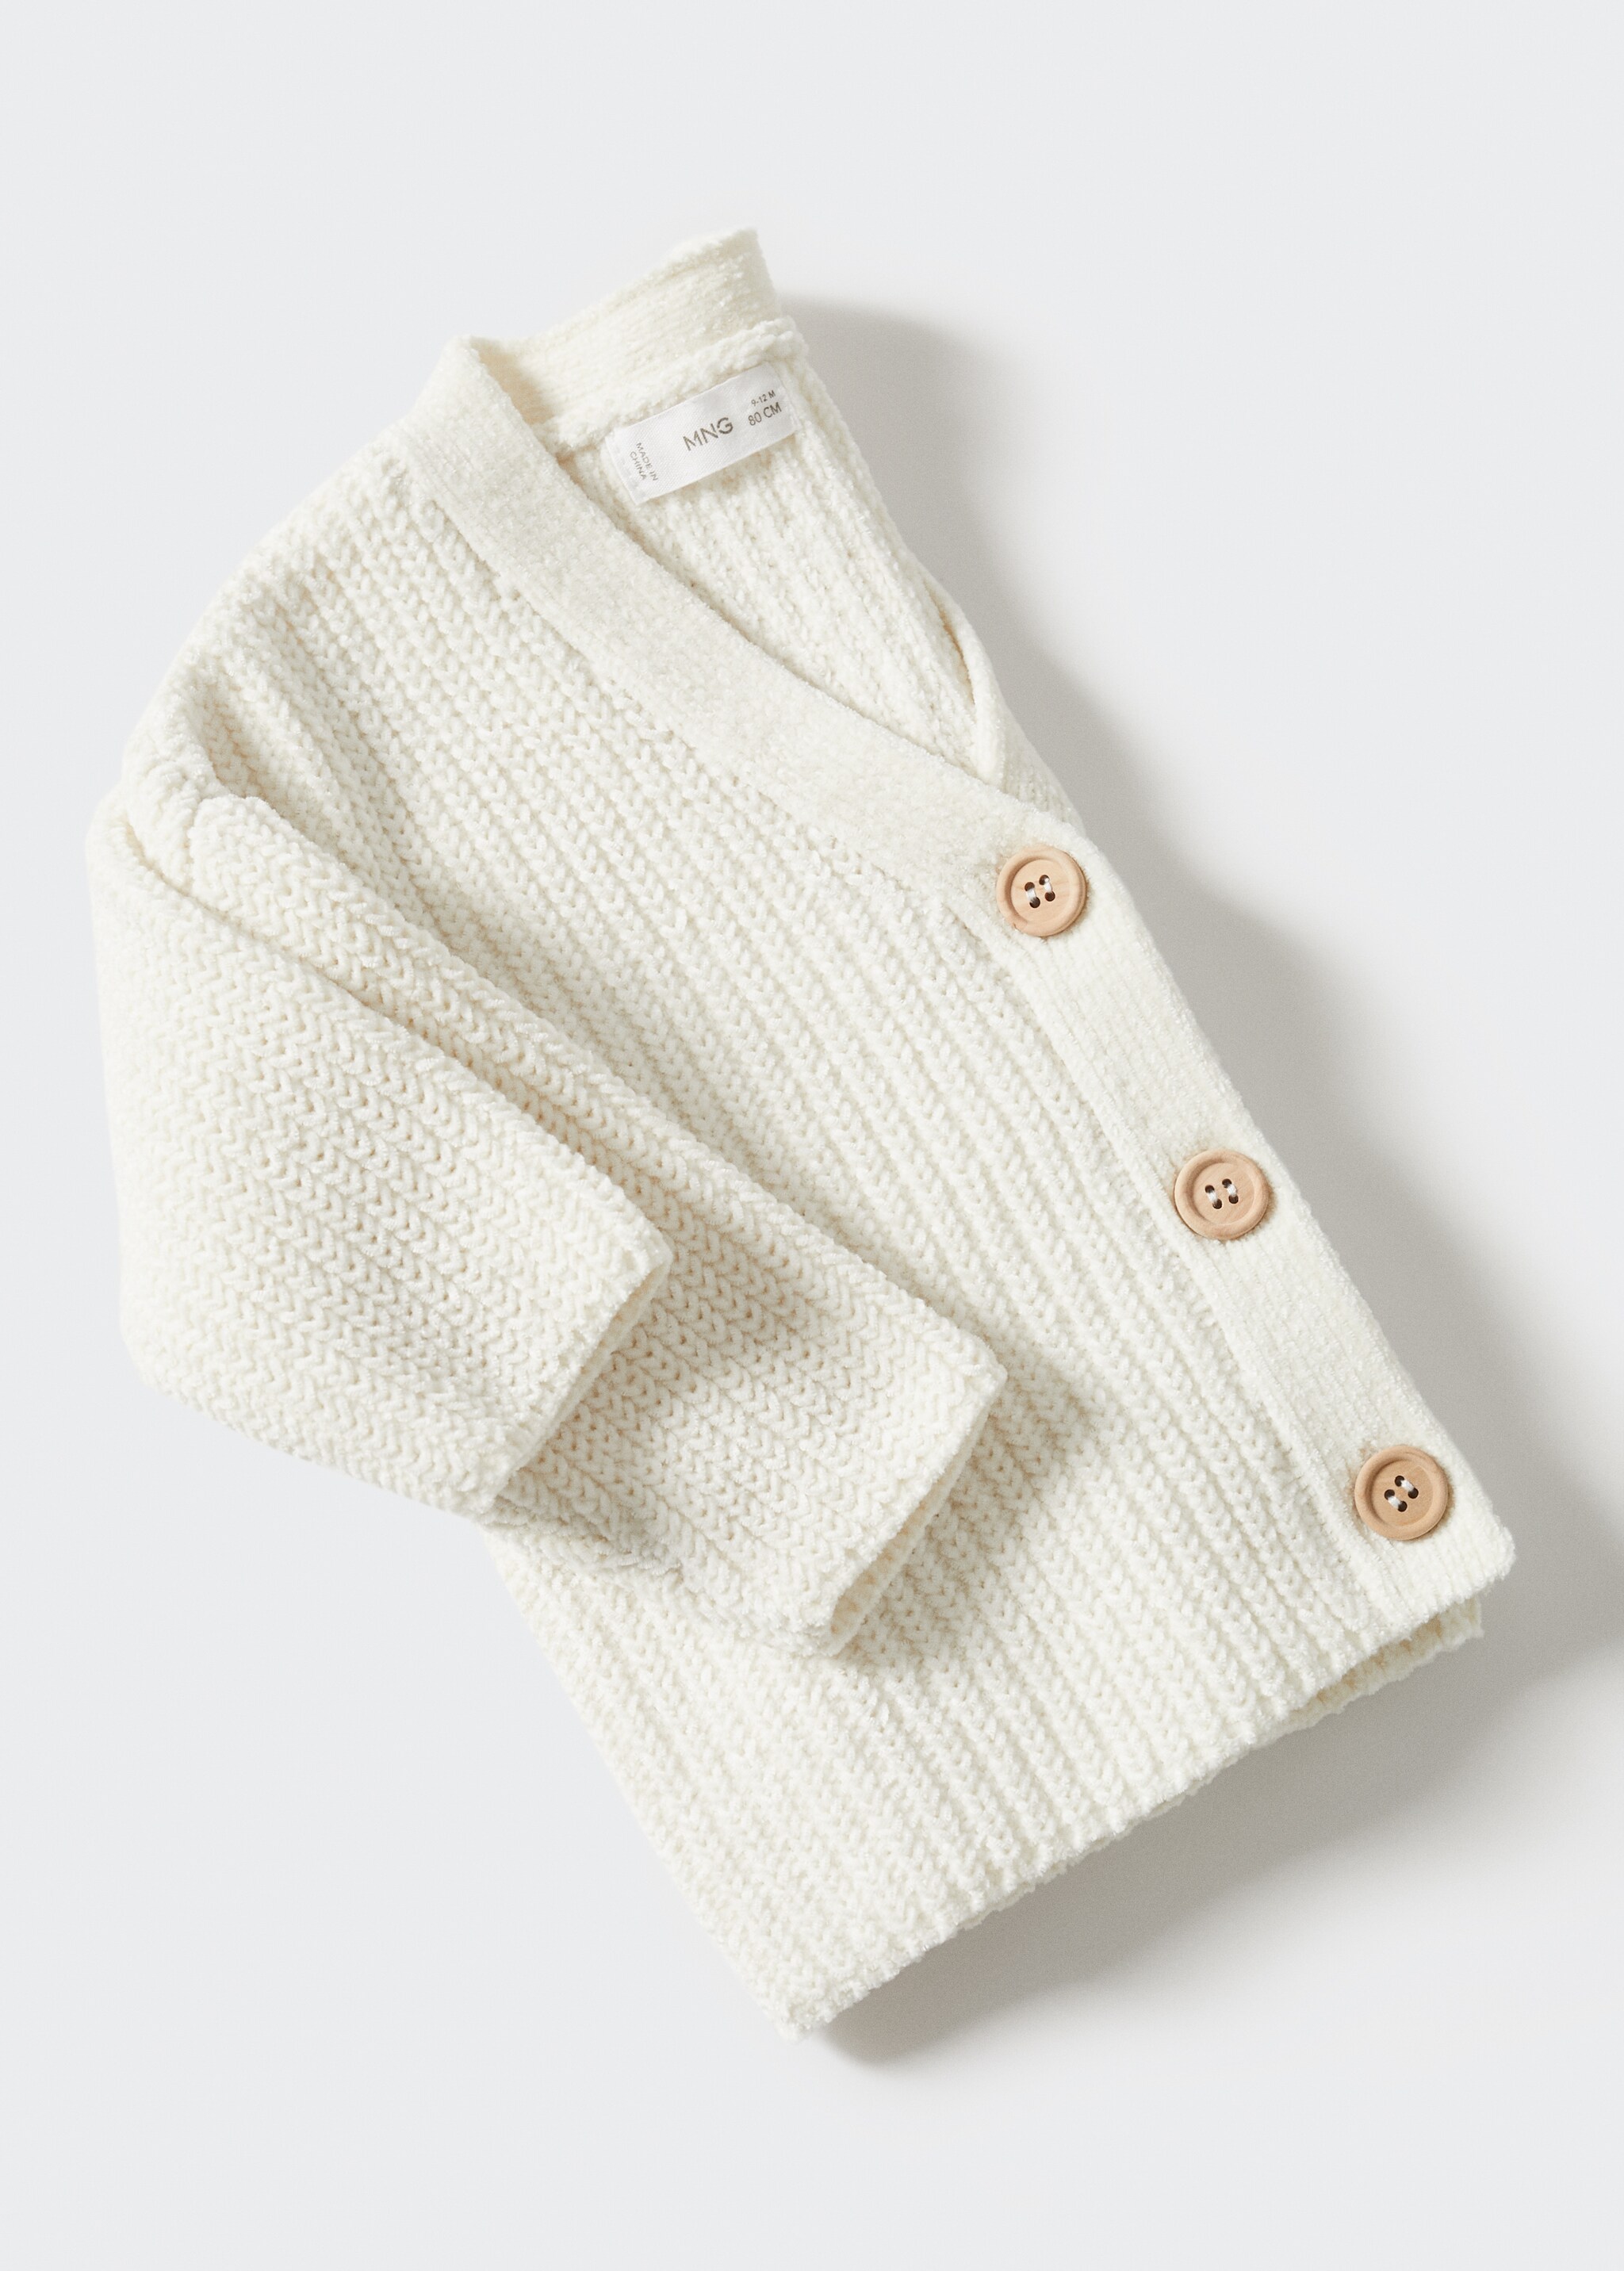 Chunky knit cardigan - Details of the article 8